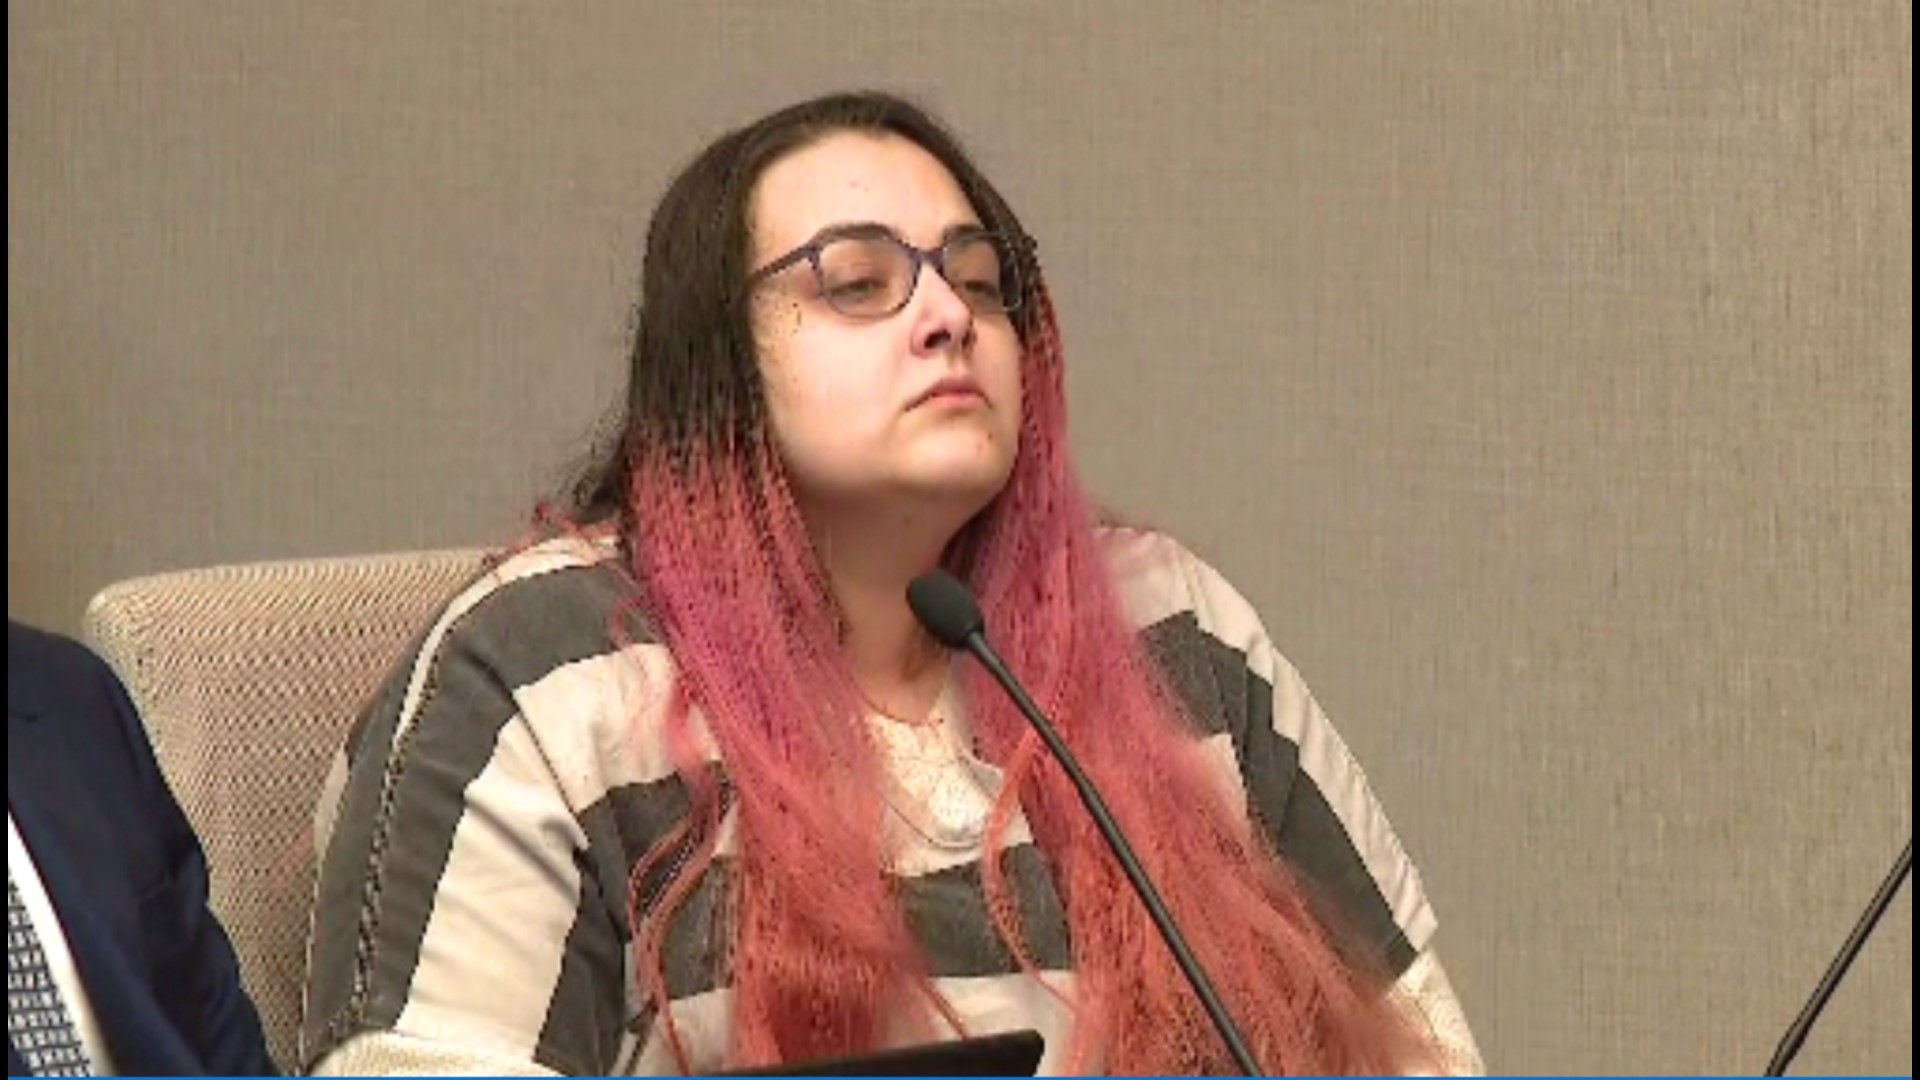 Laylah Bordeau, 26, was found guilty on eight counts of aggravated vehicular homicide on Wednesday.